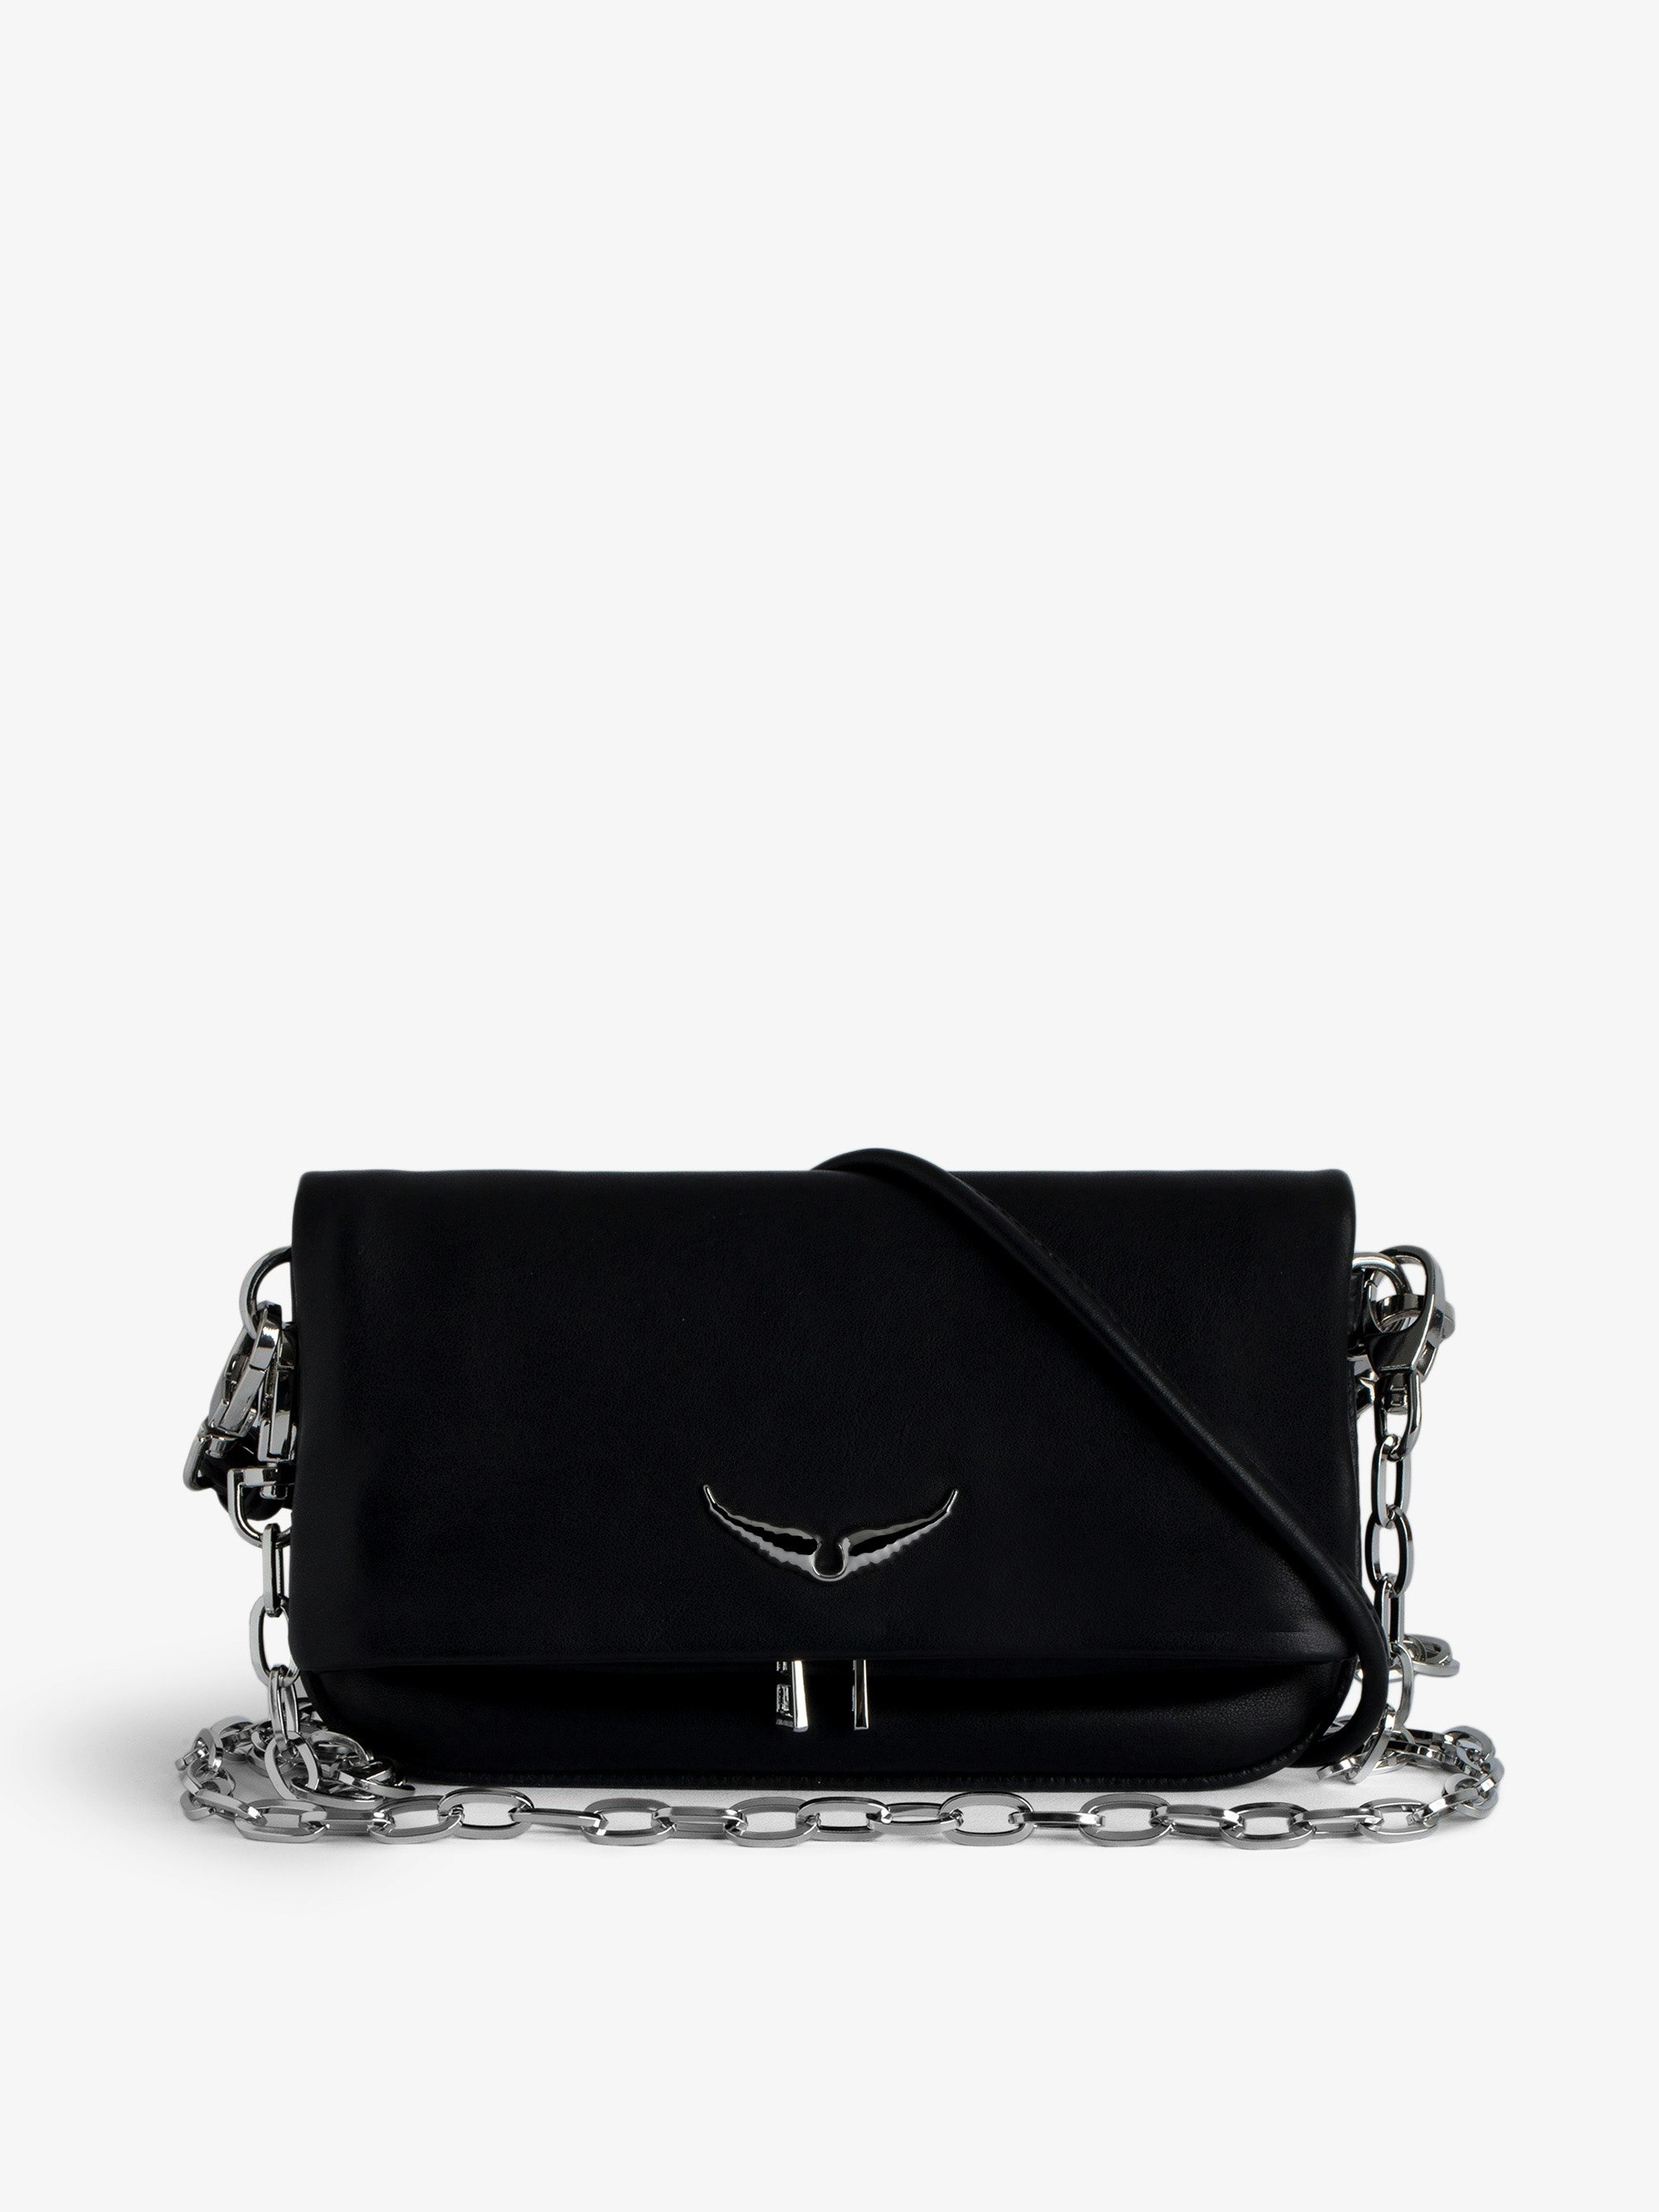 Rock Nano Eternal Clutch - Small black smooth leather clutch with tied handle and chain.